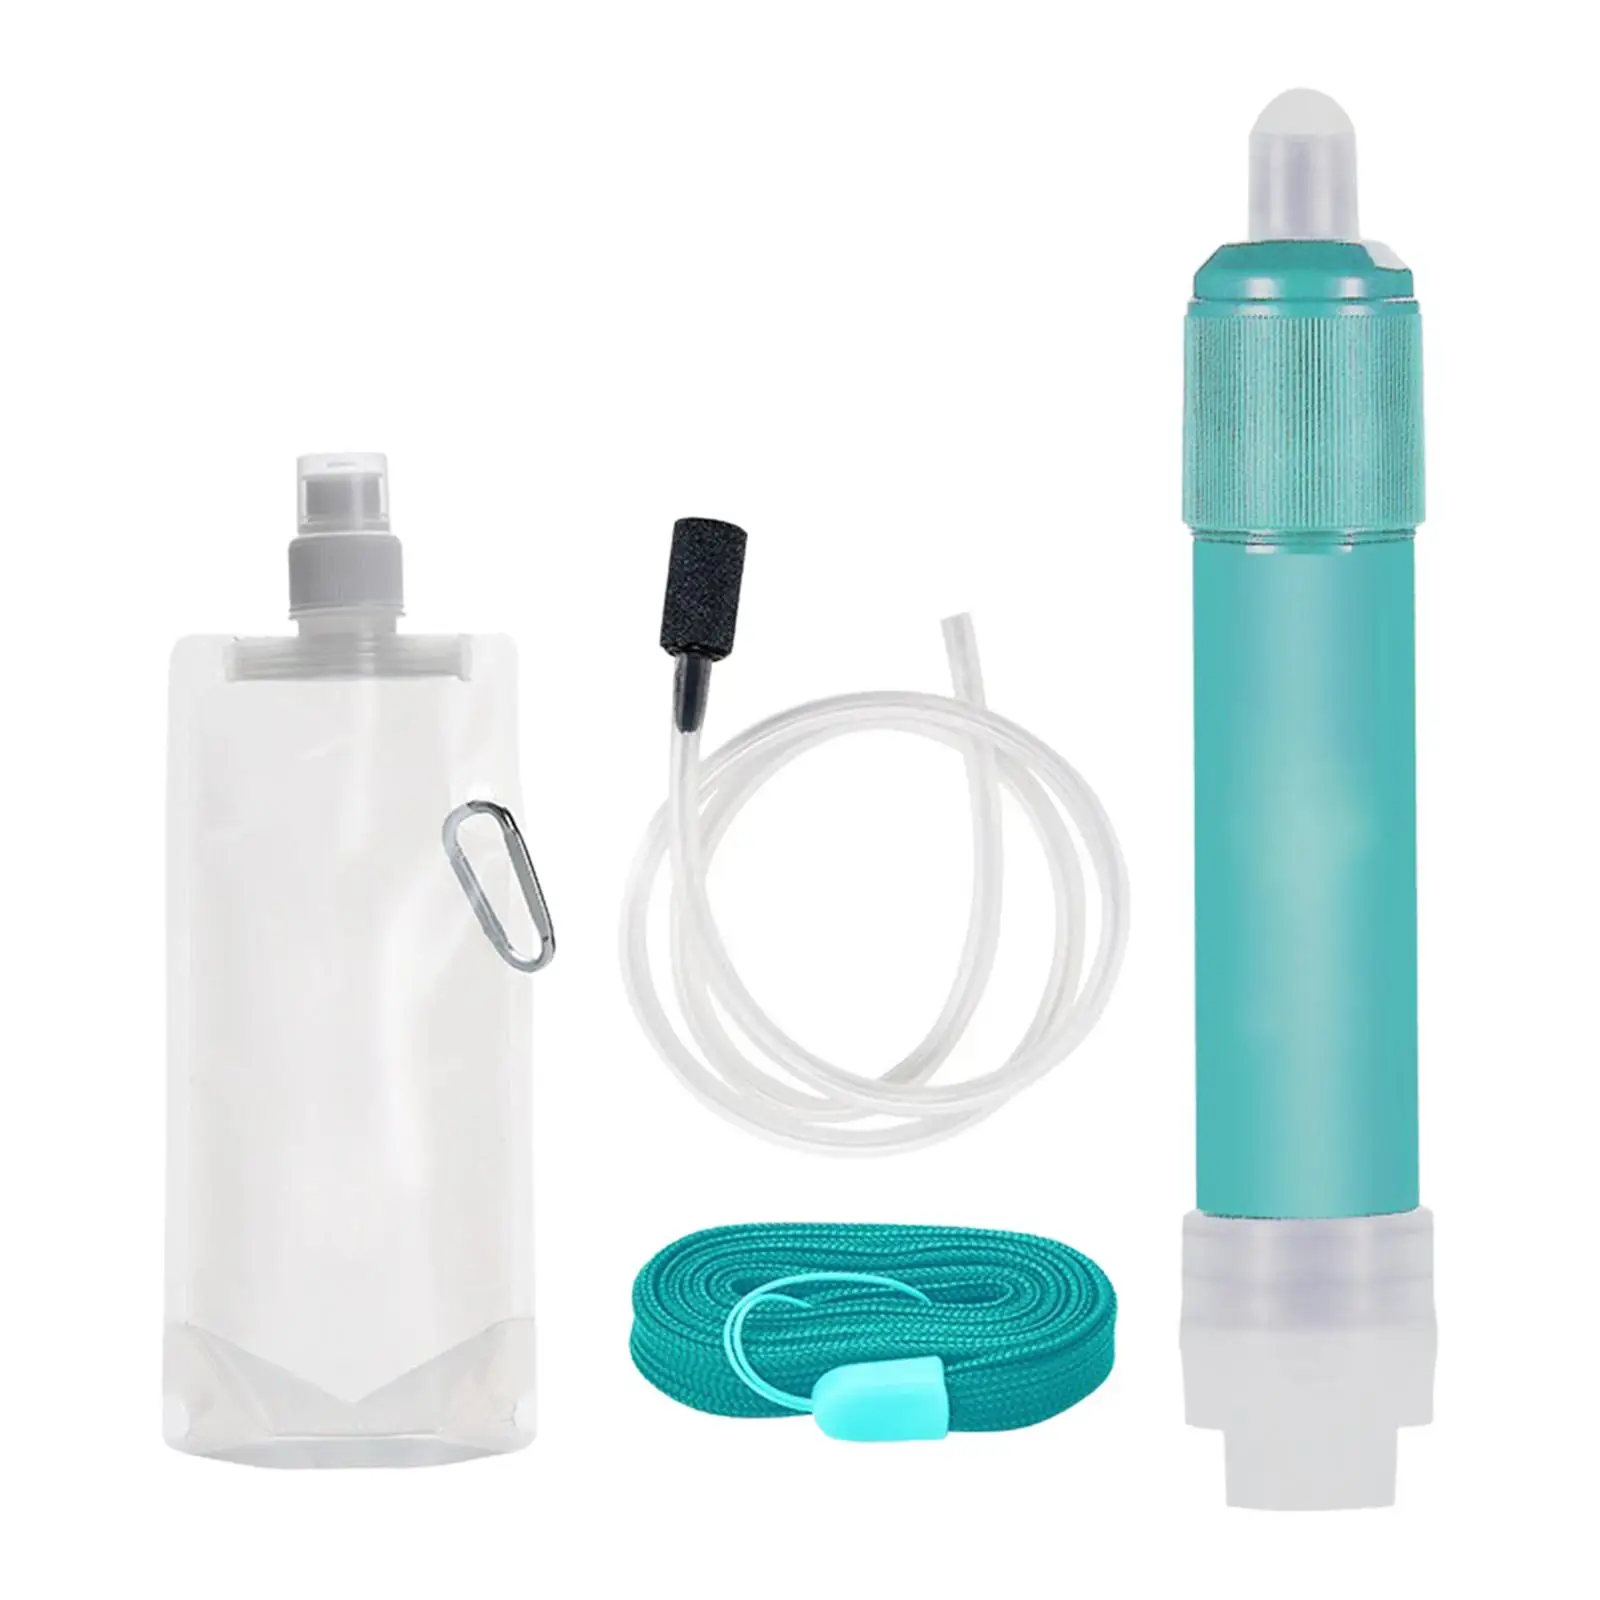 Portable Straw Water Filter Preparedness Equipment 4000L System for Backpacking